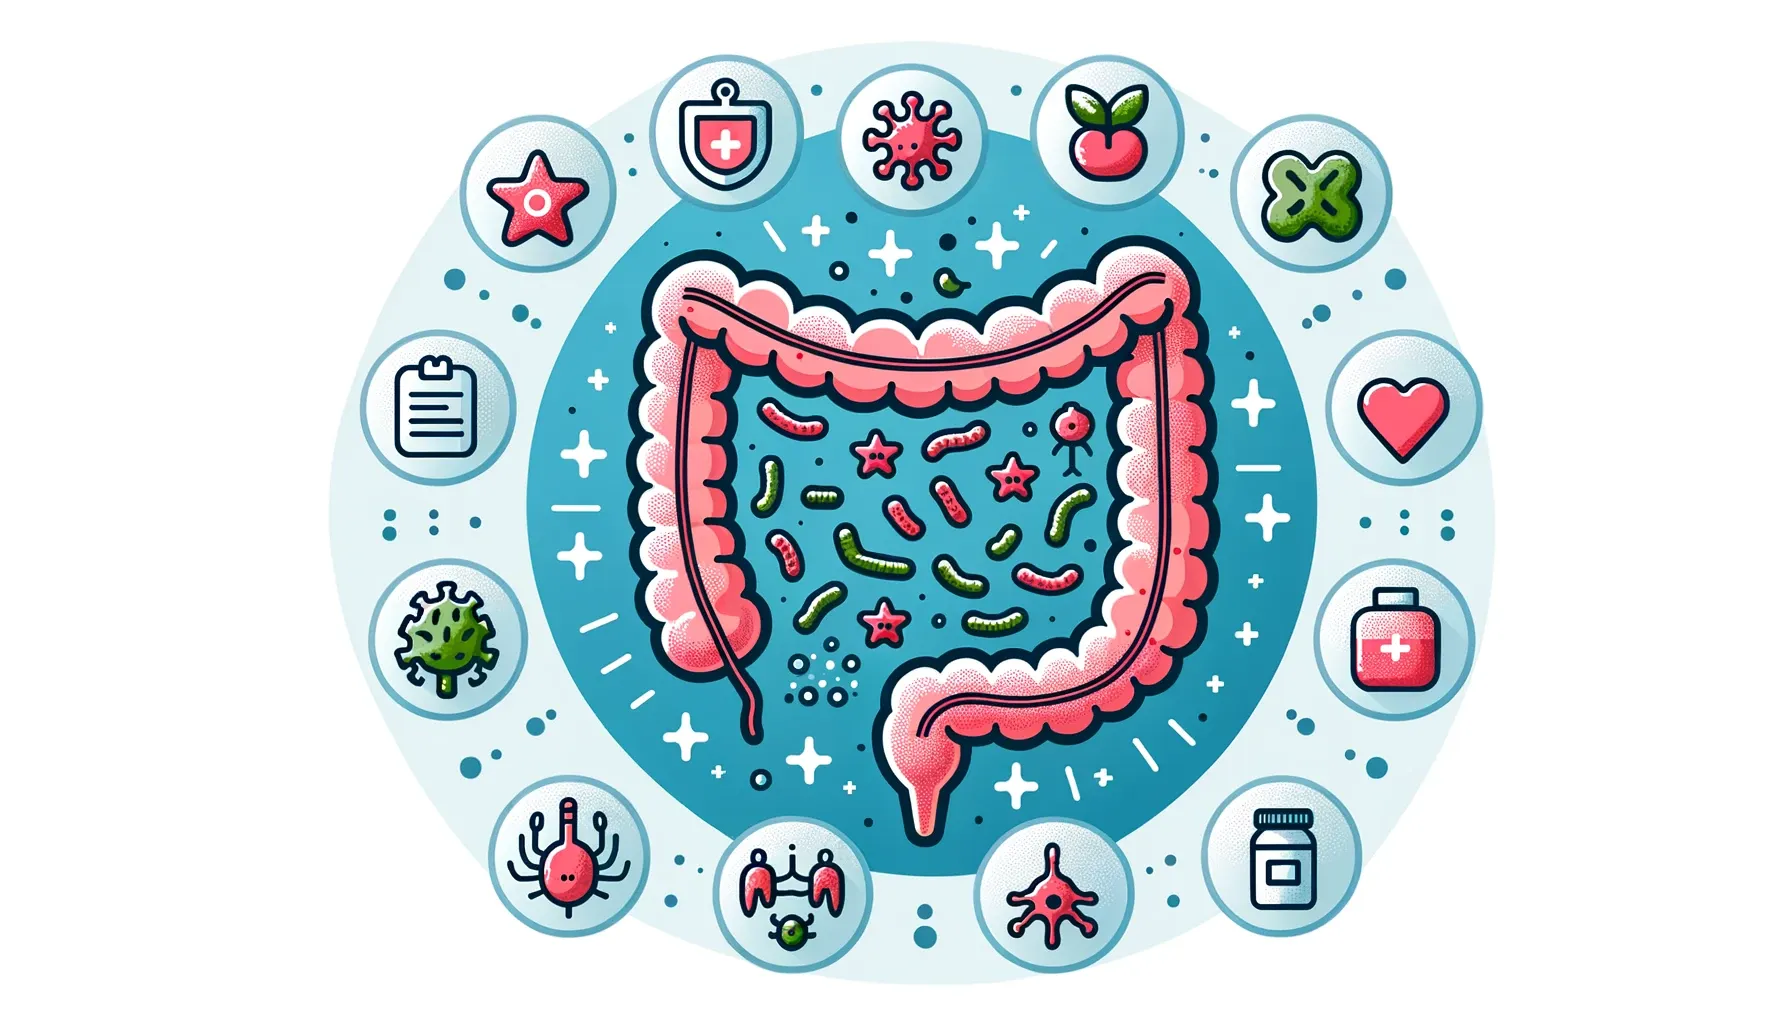 Illustration of a digestive tract with beneficial bacteria and related icons.